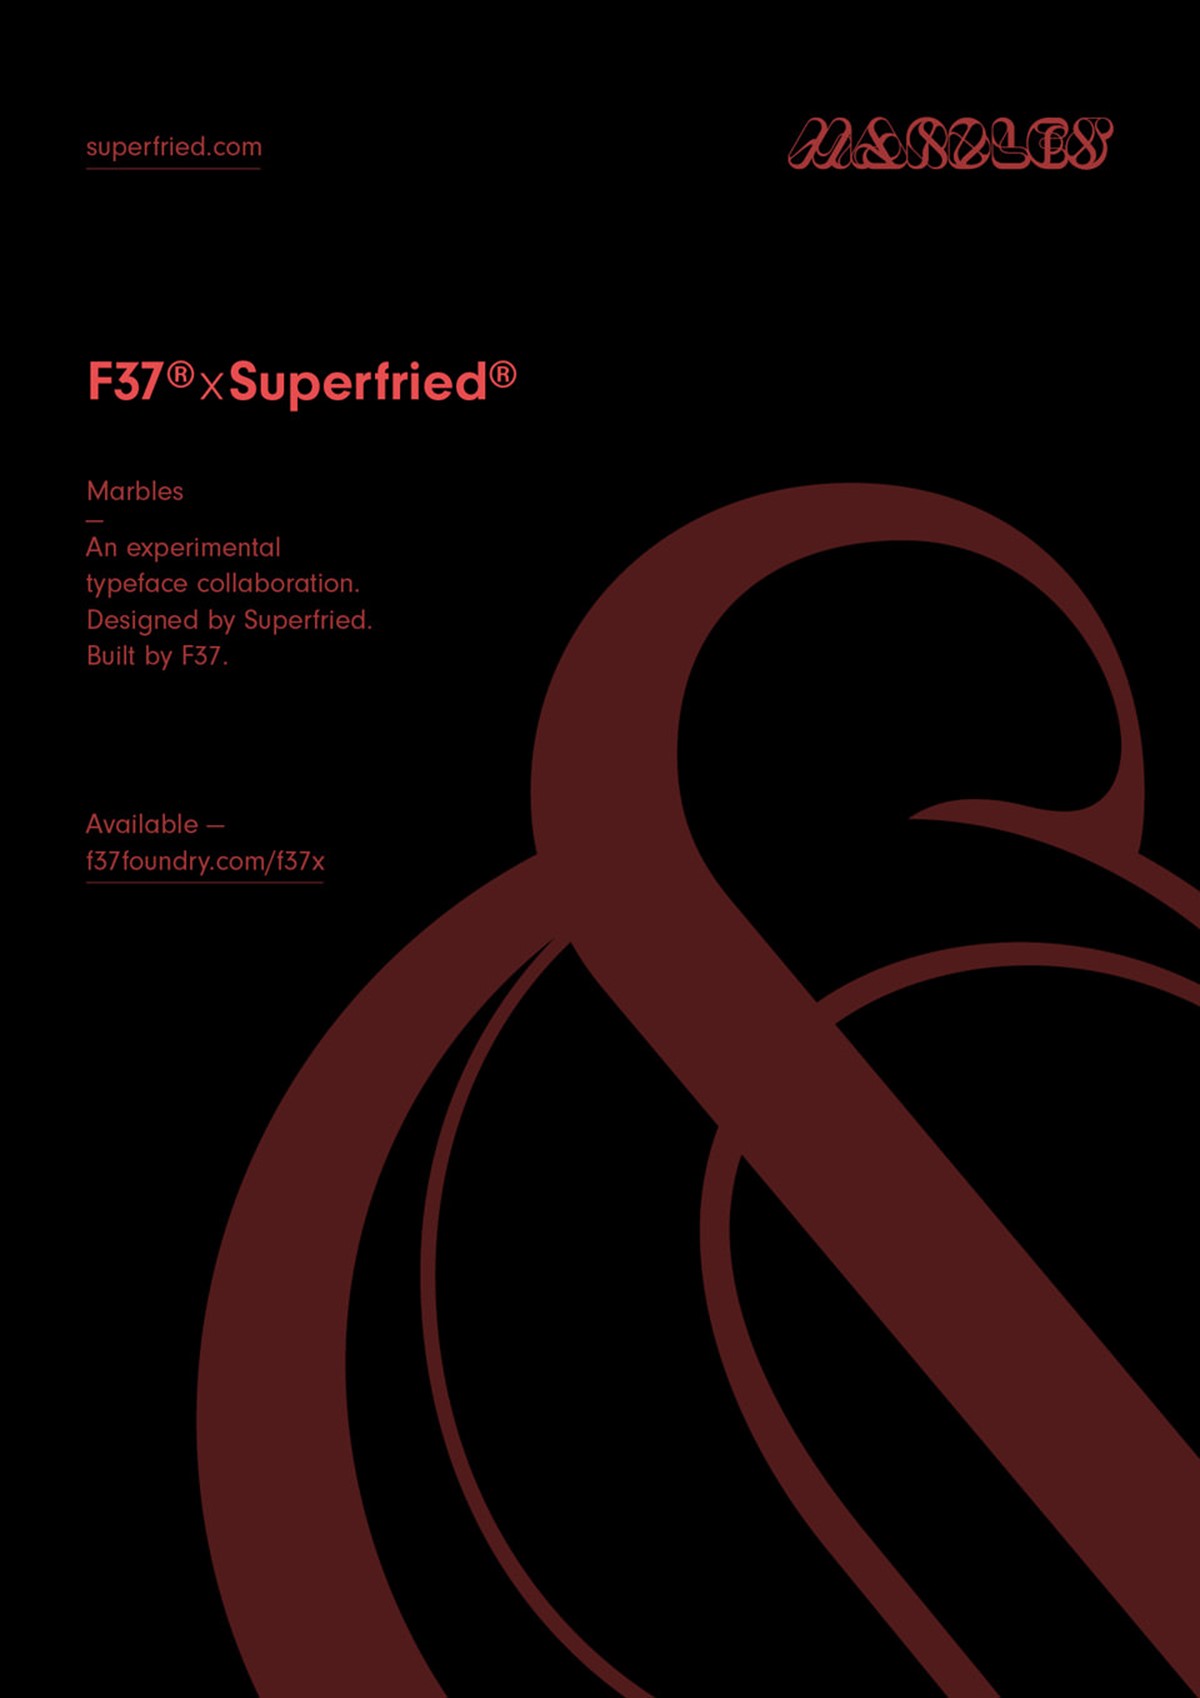 Marbles – An experimental typeface collaboration. Designed by Superfried. Built by F37. Manchester. Ampersand poster.